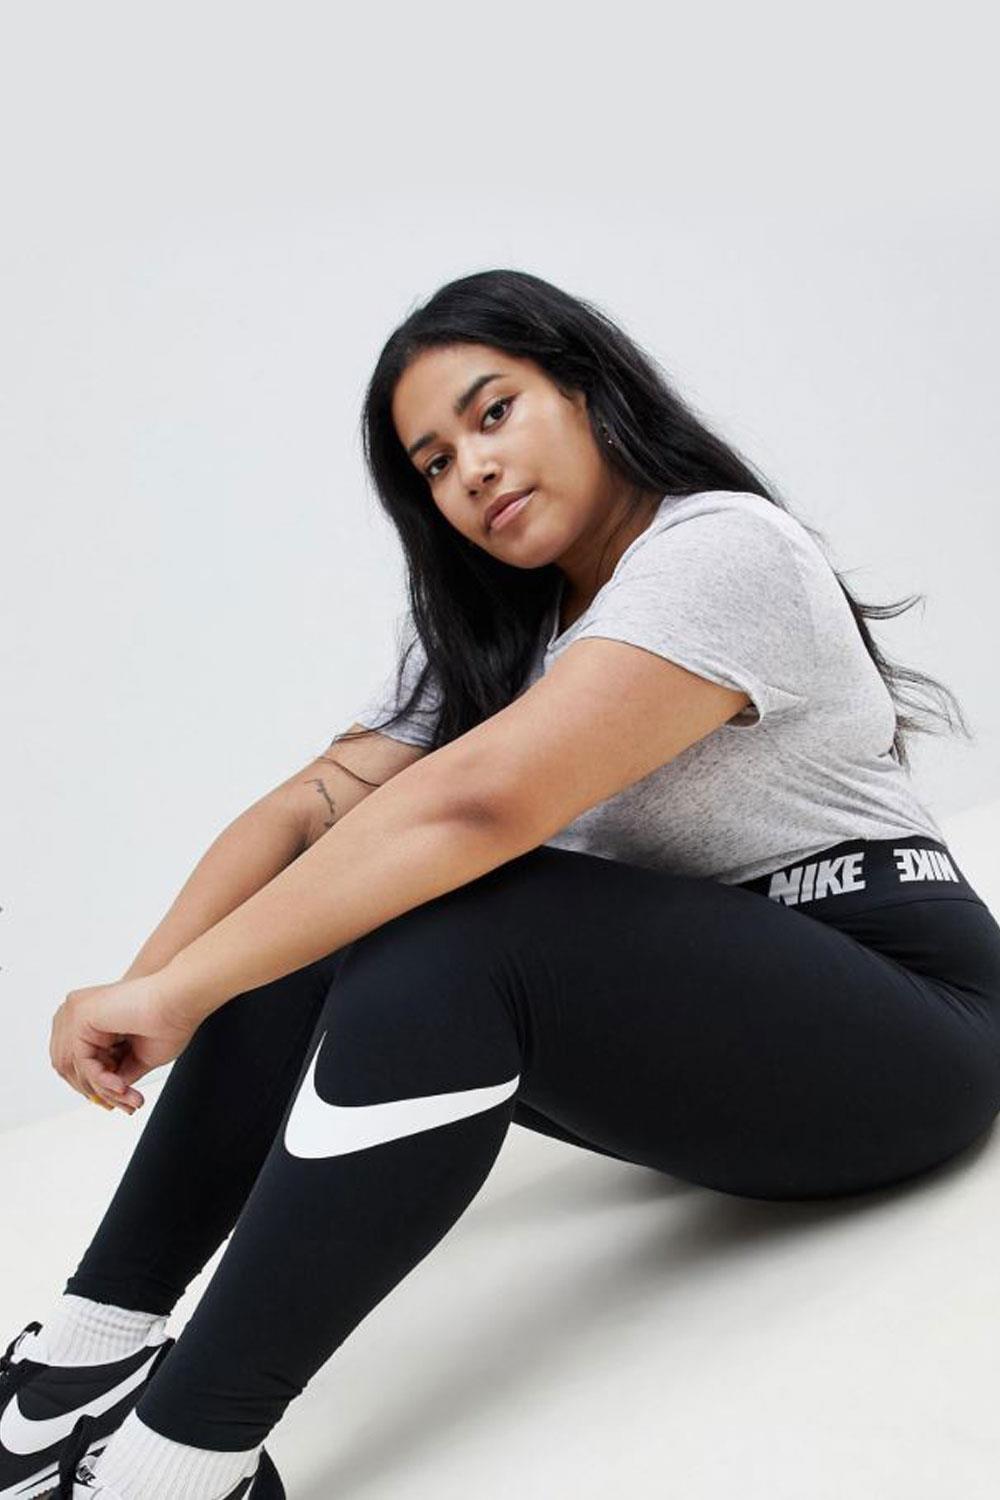 ropa deportiva para mujer nike outlet 8a70d f6e51